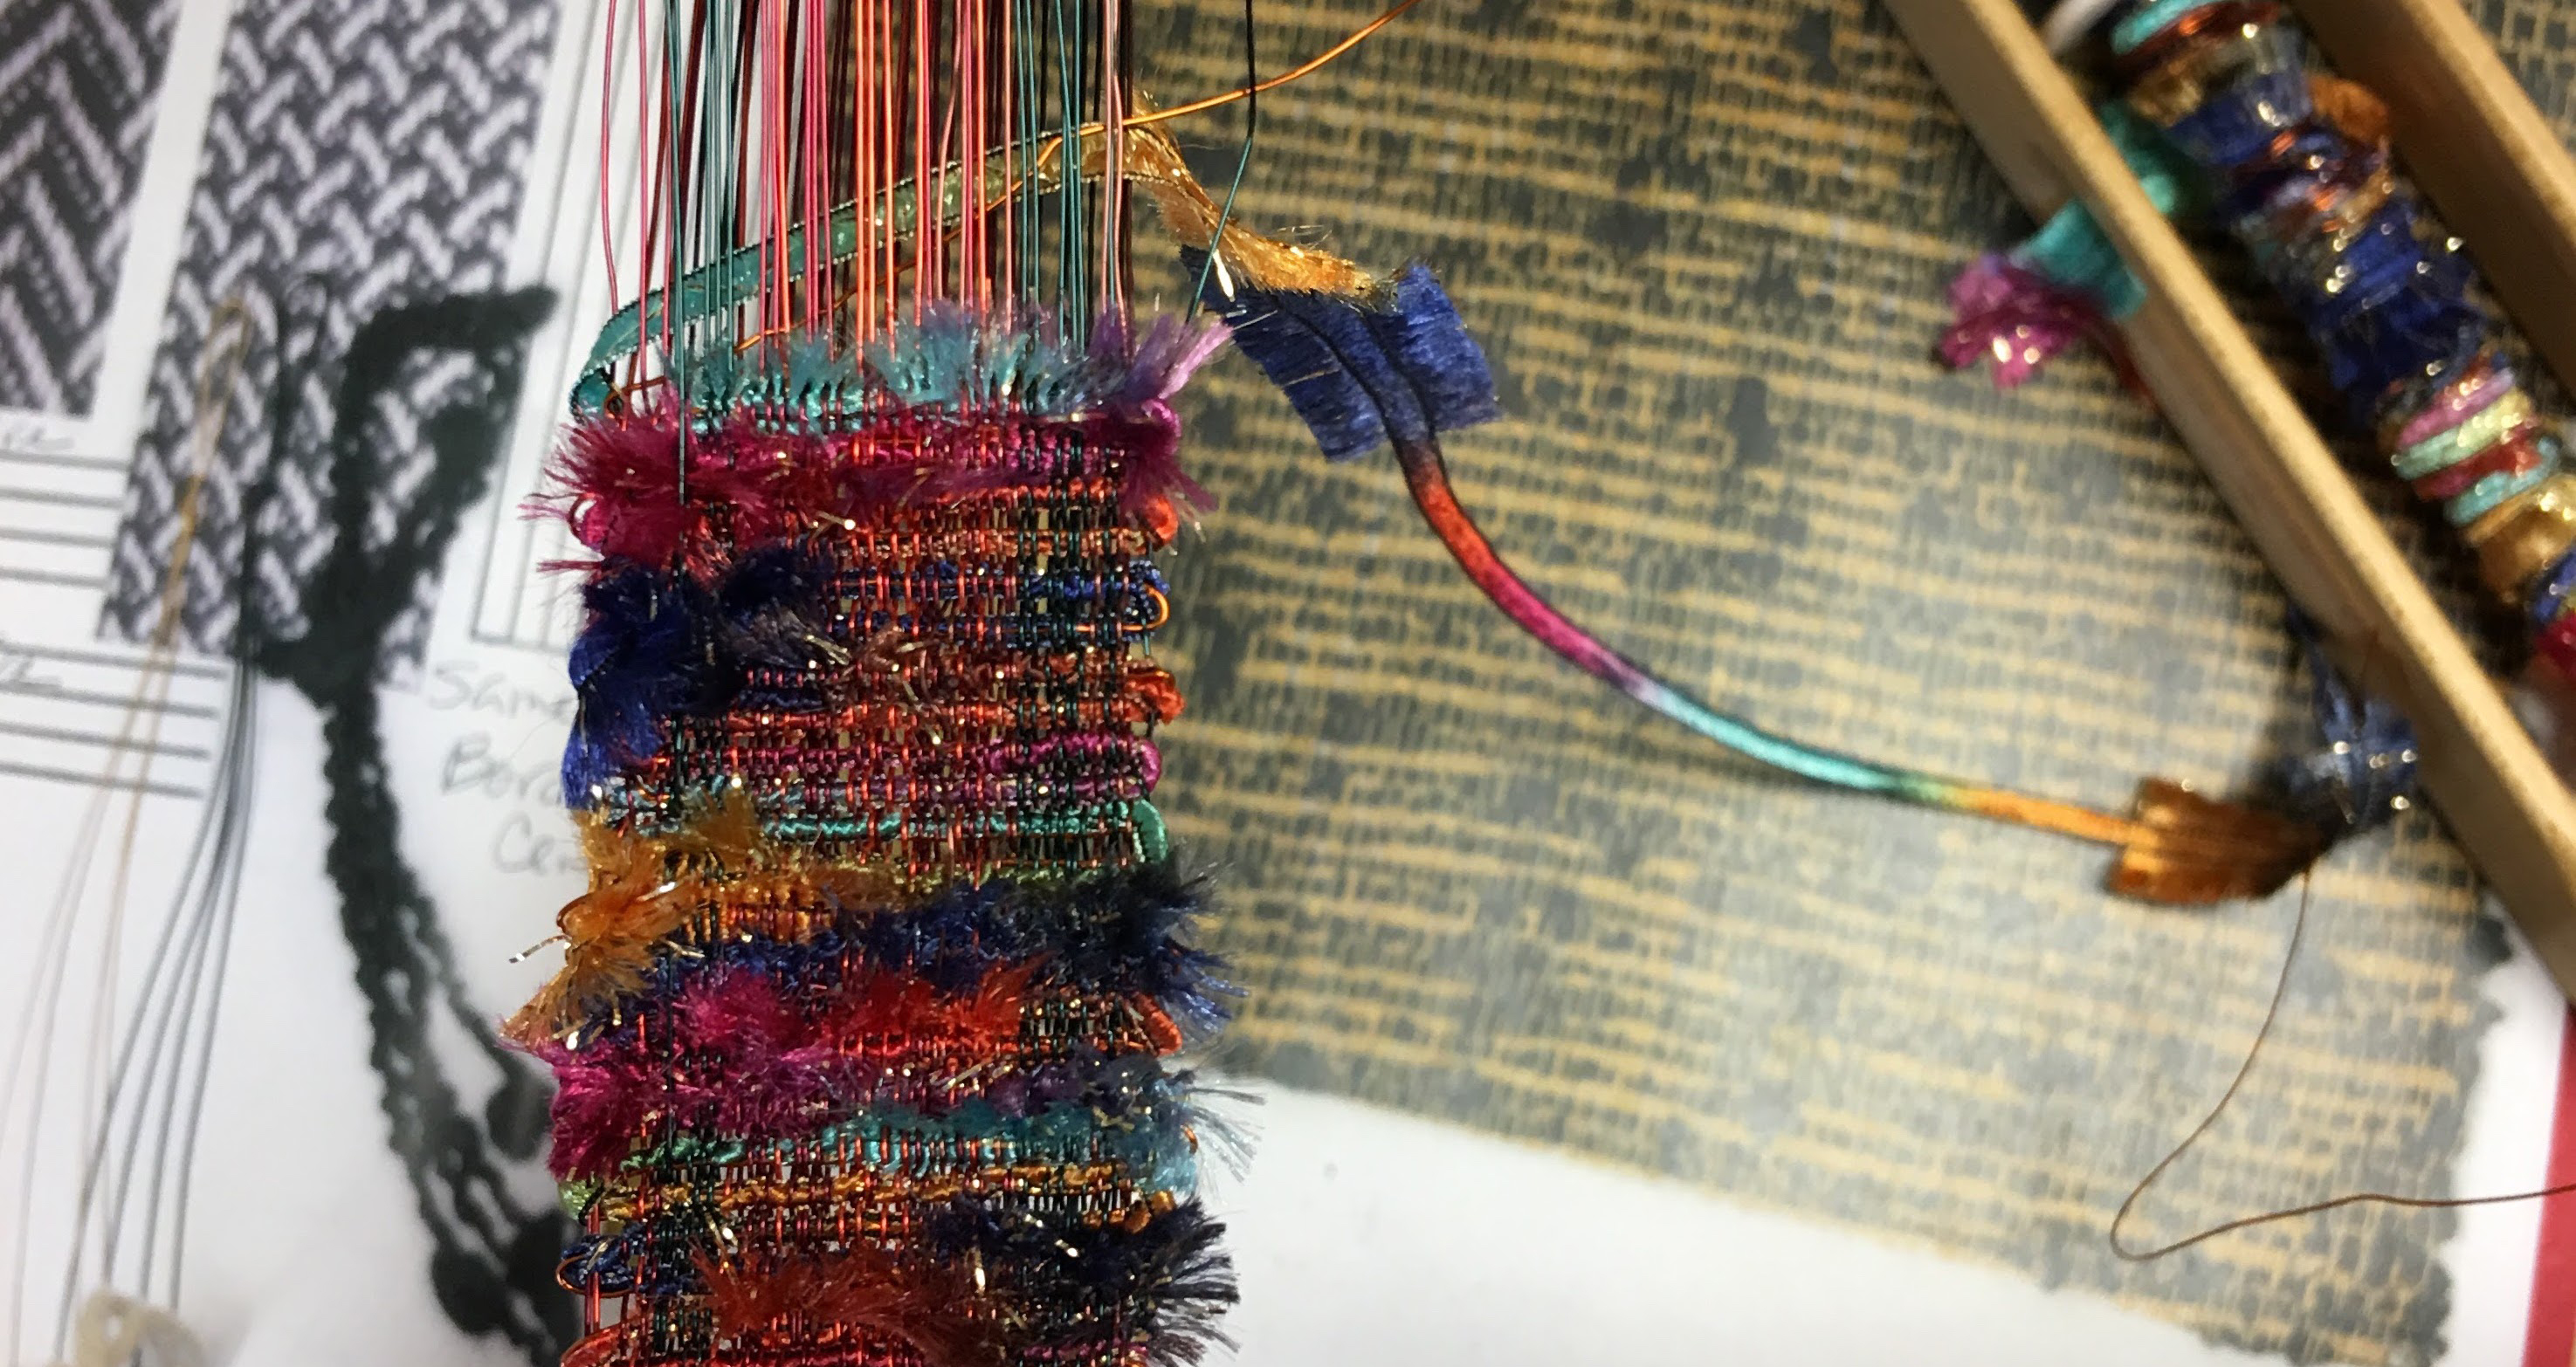 Join the Weaving with Wire Community